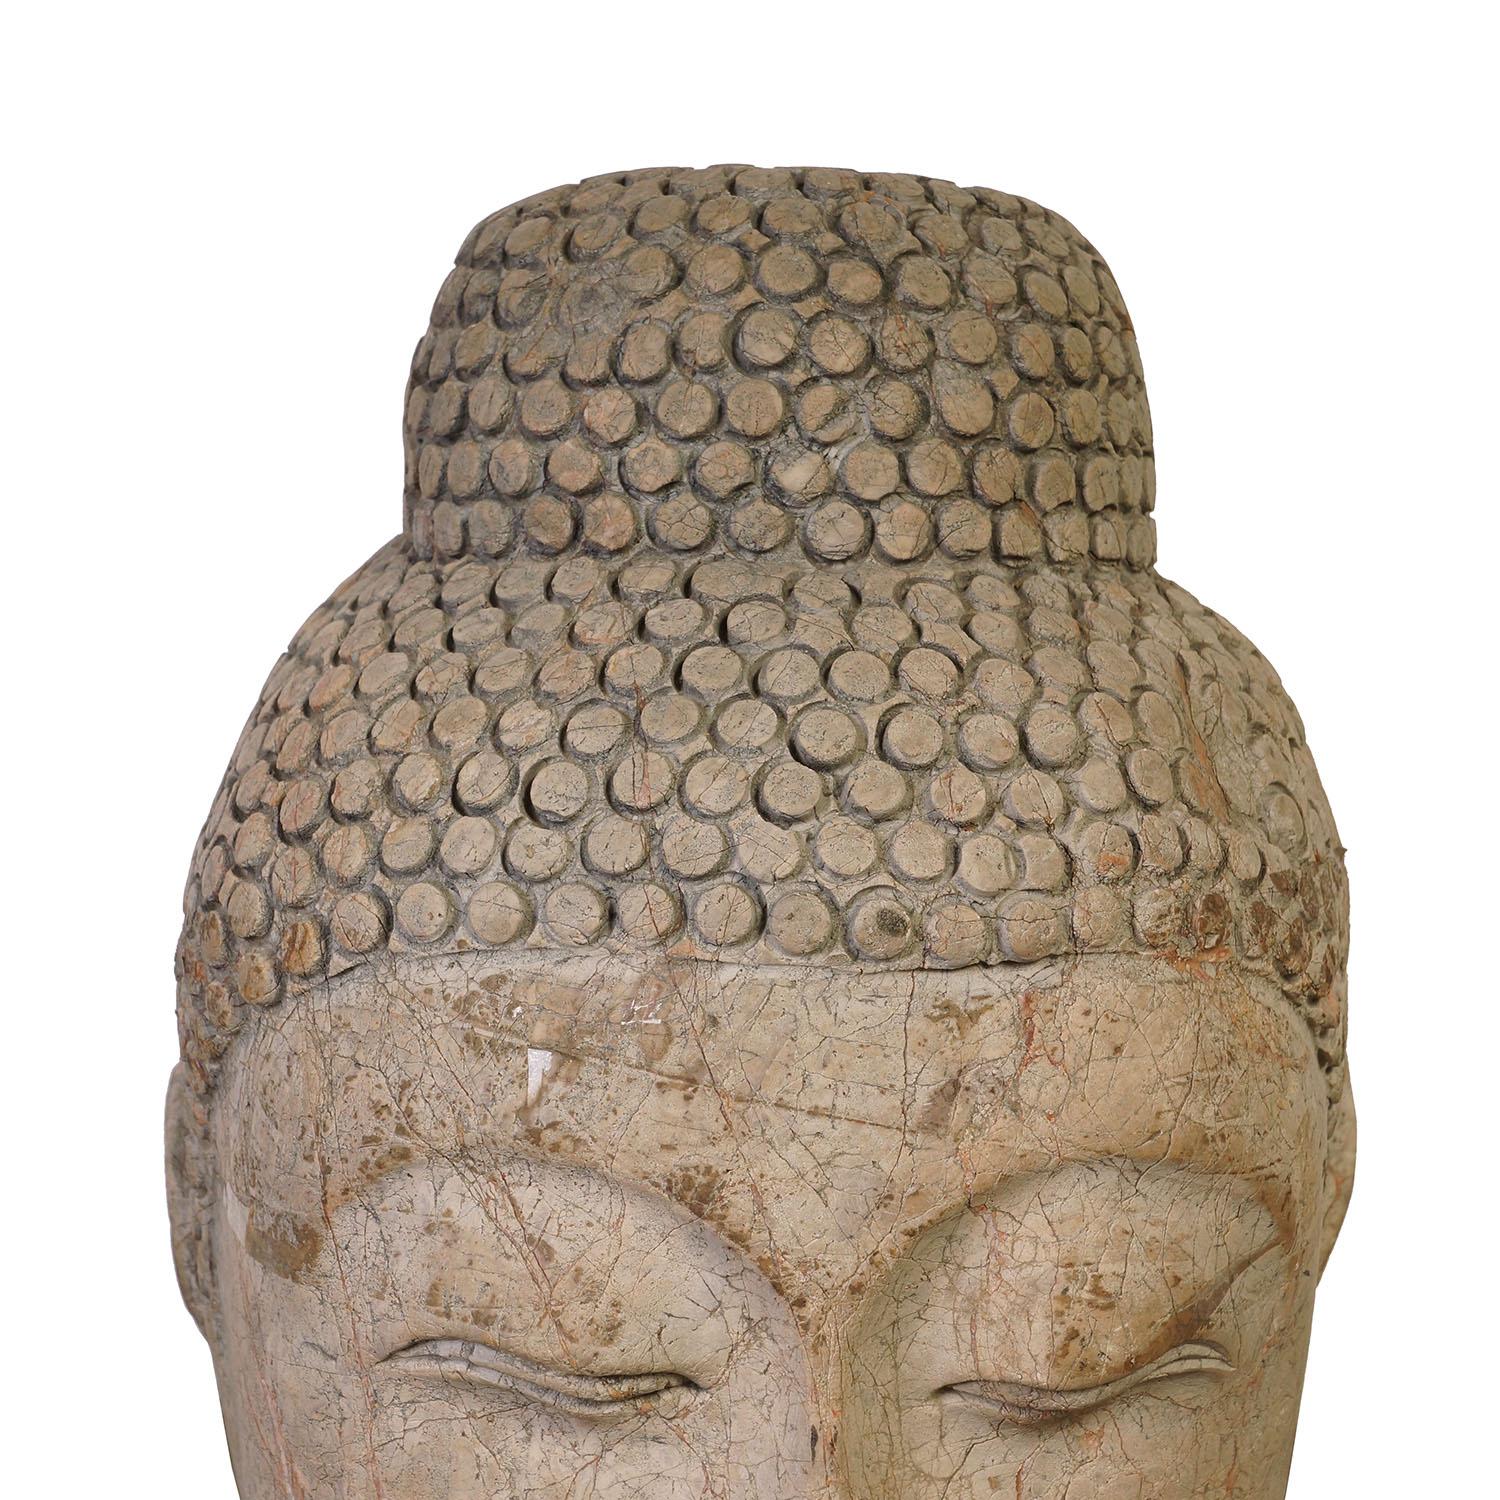 Look at this magnificent Chinese antique carved stone Shakyamuni Buddha Head. It shows very detailed hand carving works on it. With closed eyes and a gentle expression, this large stone Buddha head brings the calm and serenity to its surroundings.